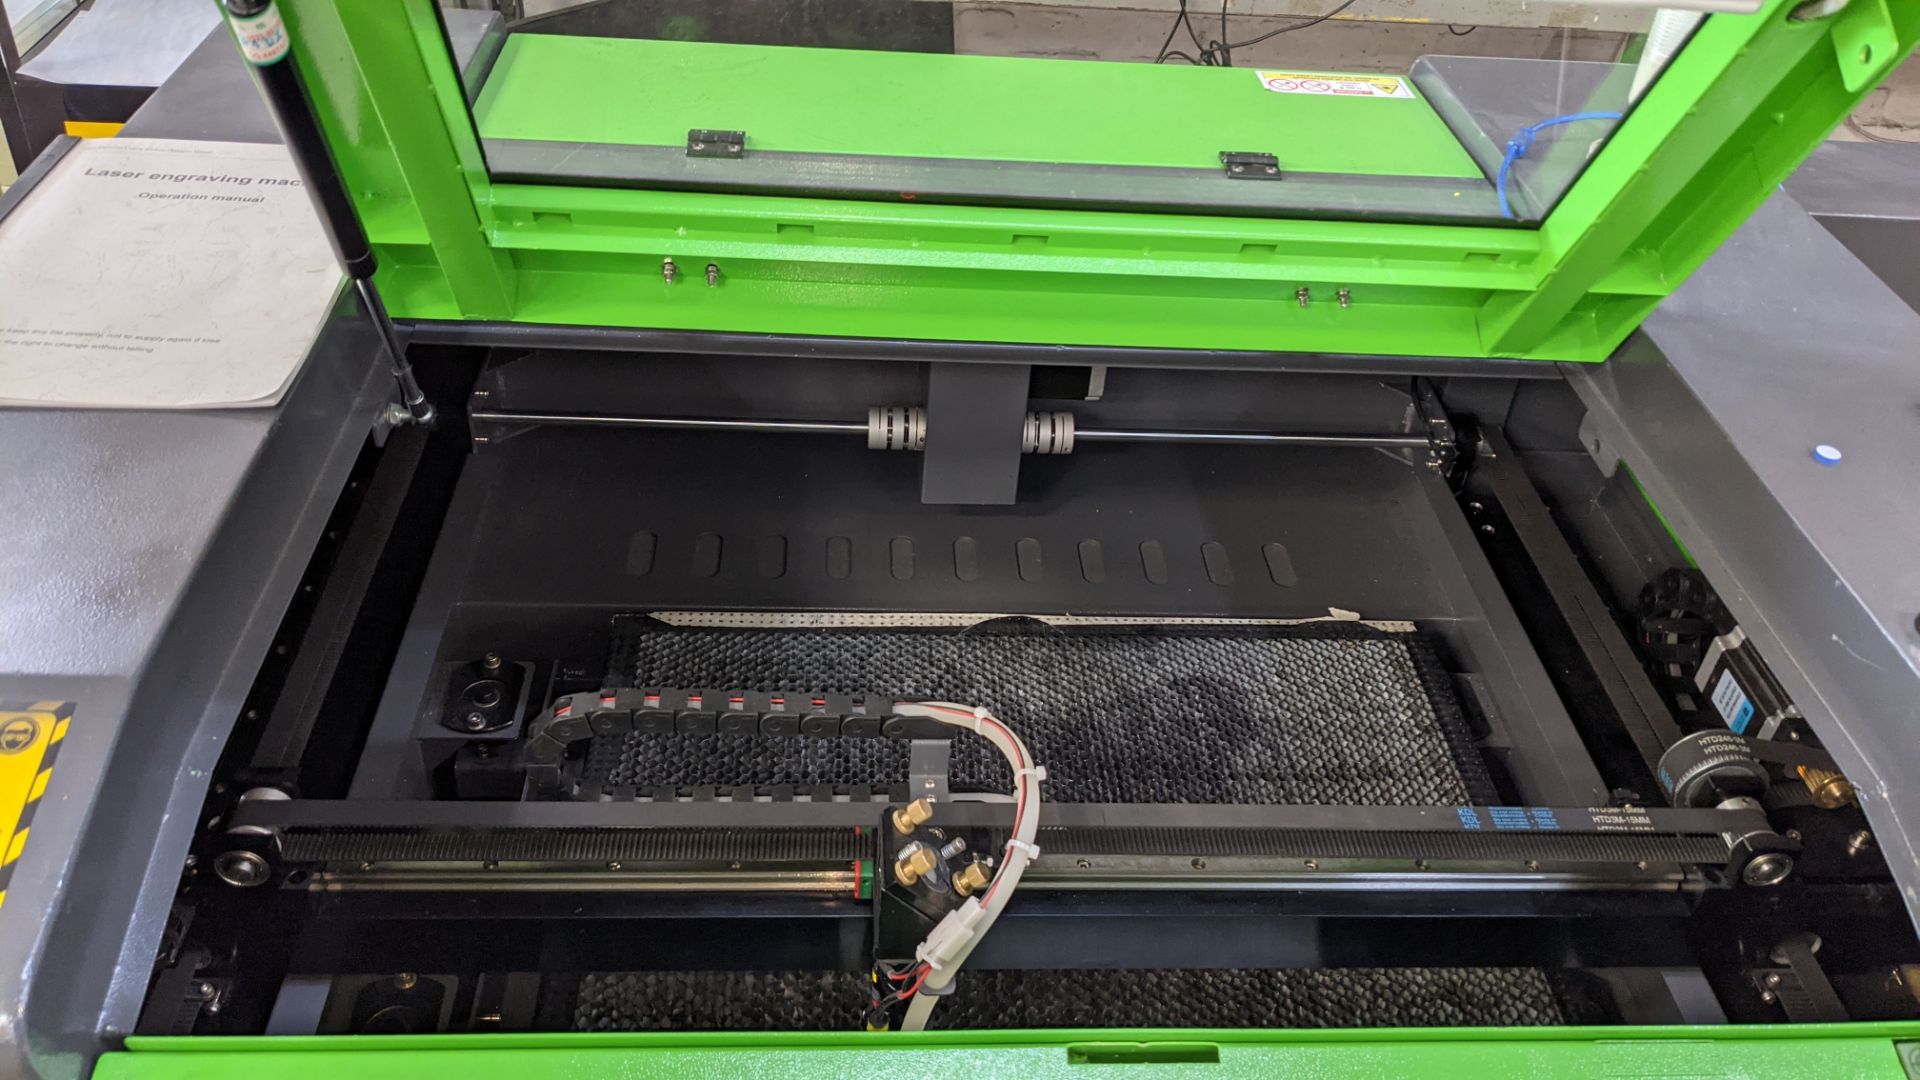 2019 Zing laser engraving machine/cutter, model Z6040. 60w laser power. Date of manufacture May 2019 - Image 20 of 29